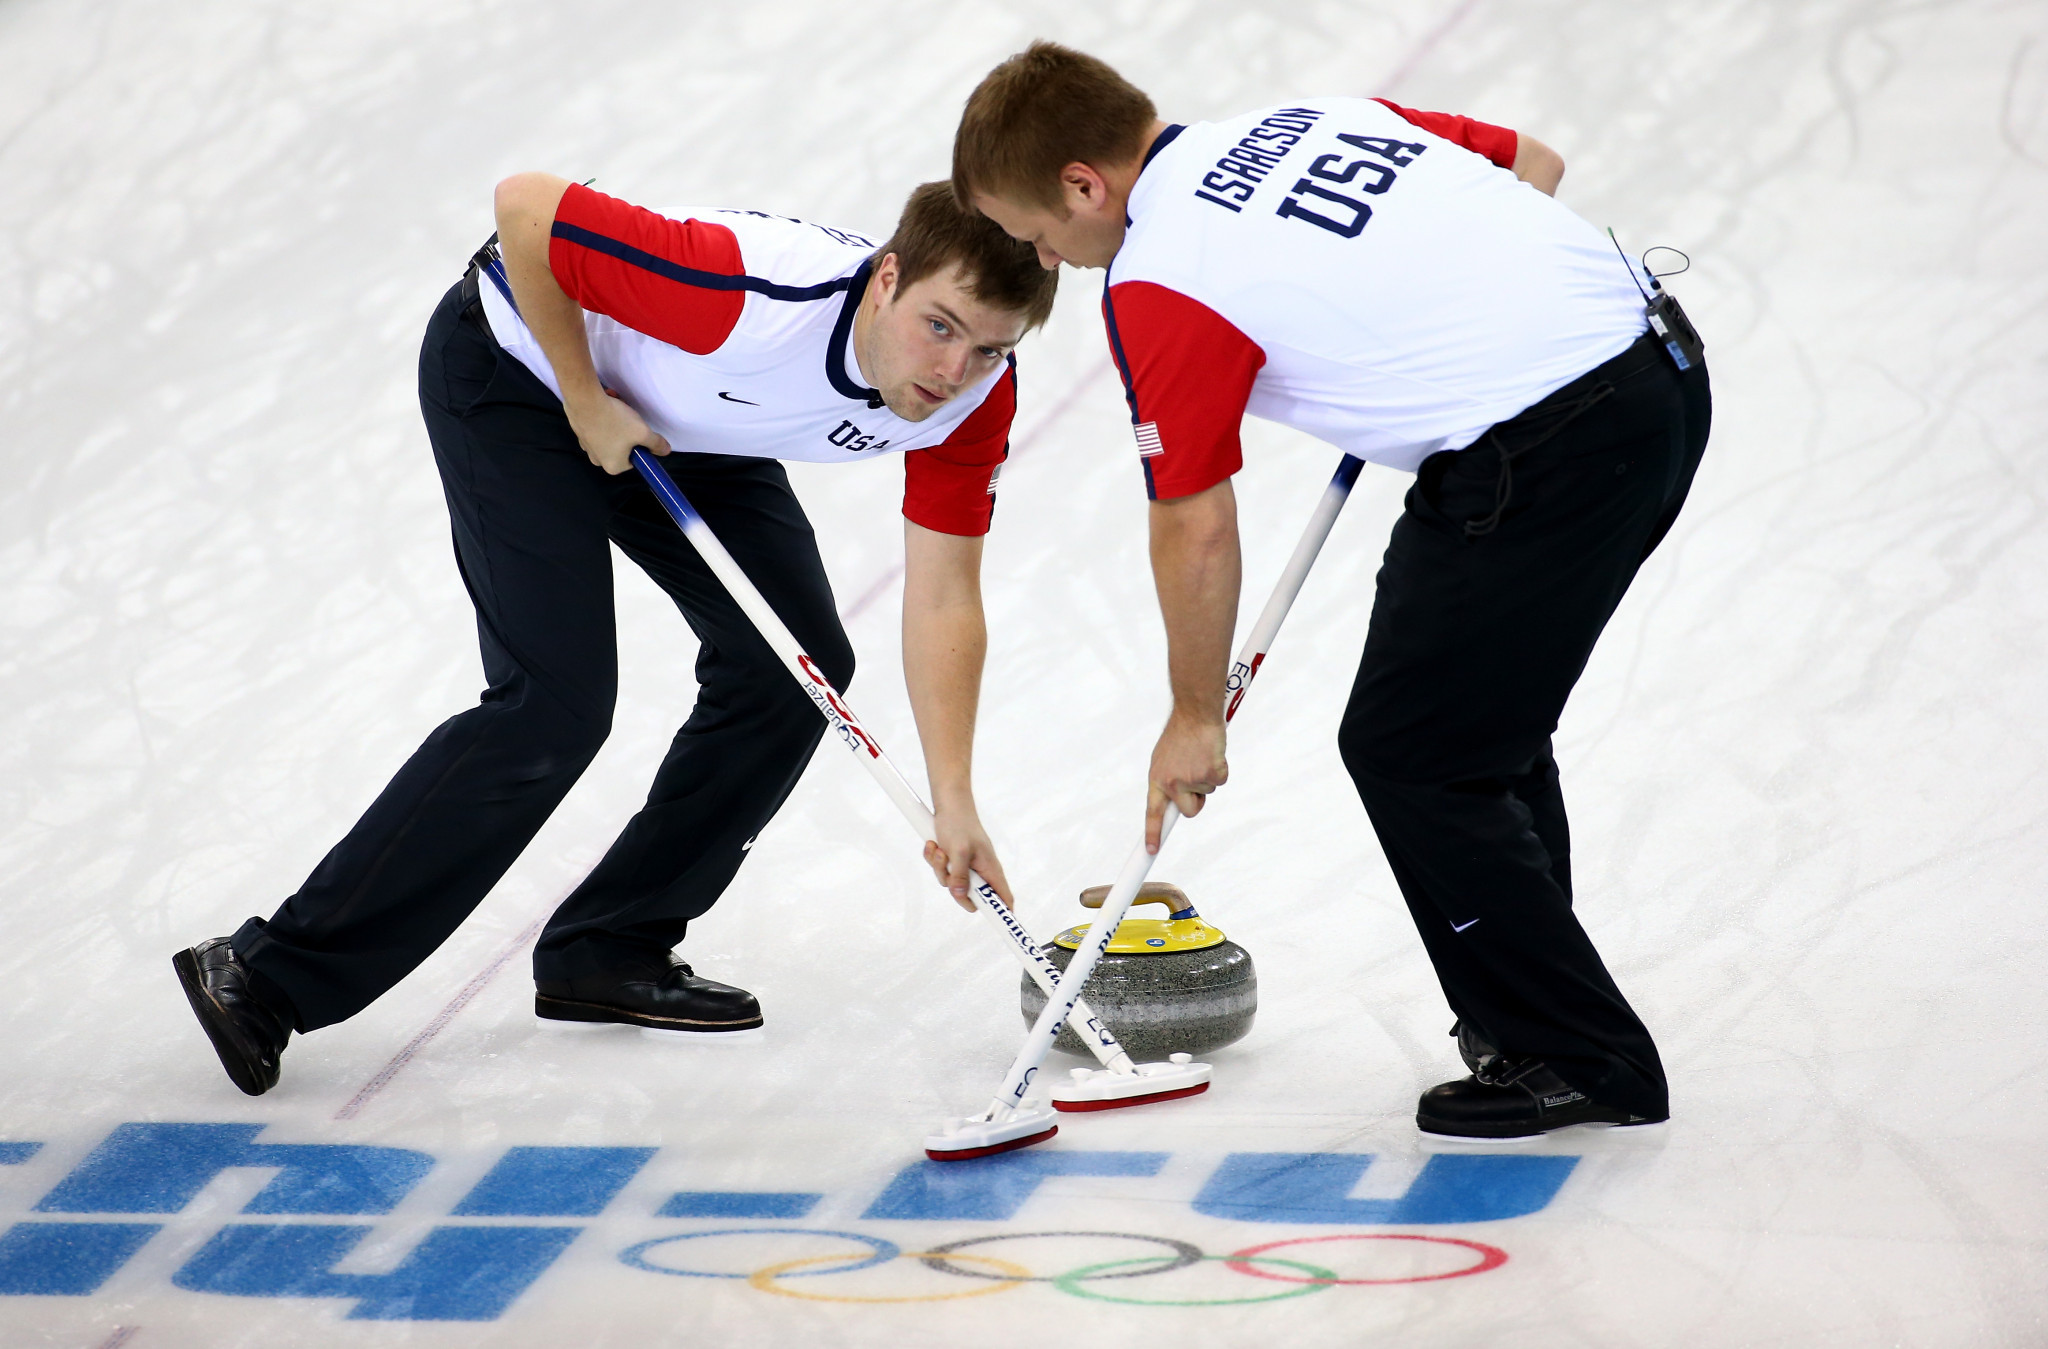 The deal is aimed at boosting curling in the United States ©Getty Images